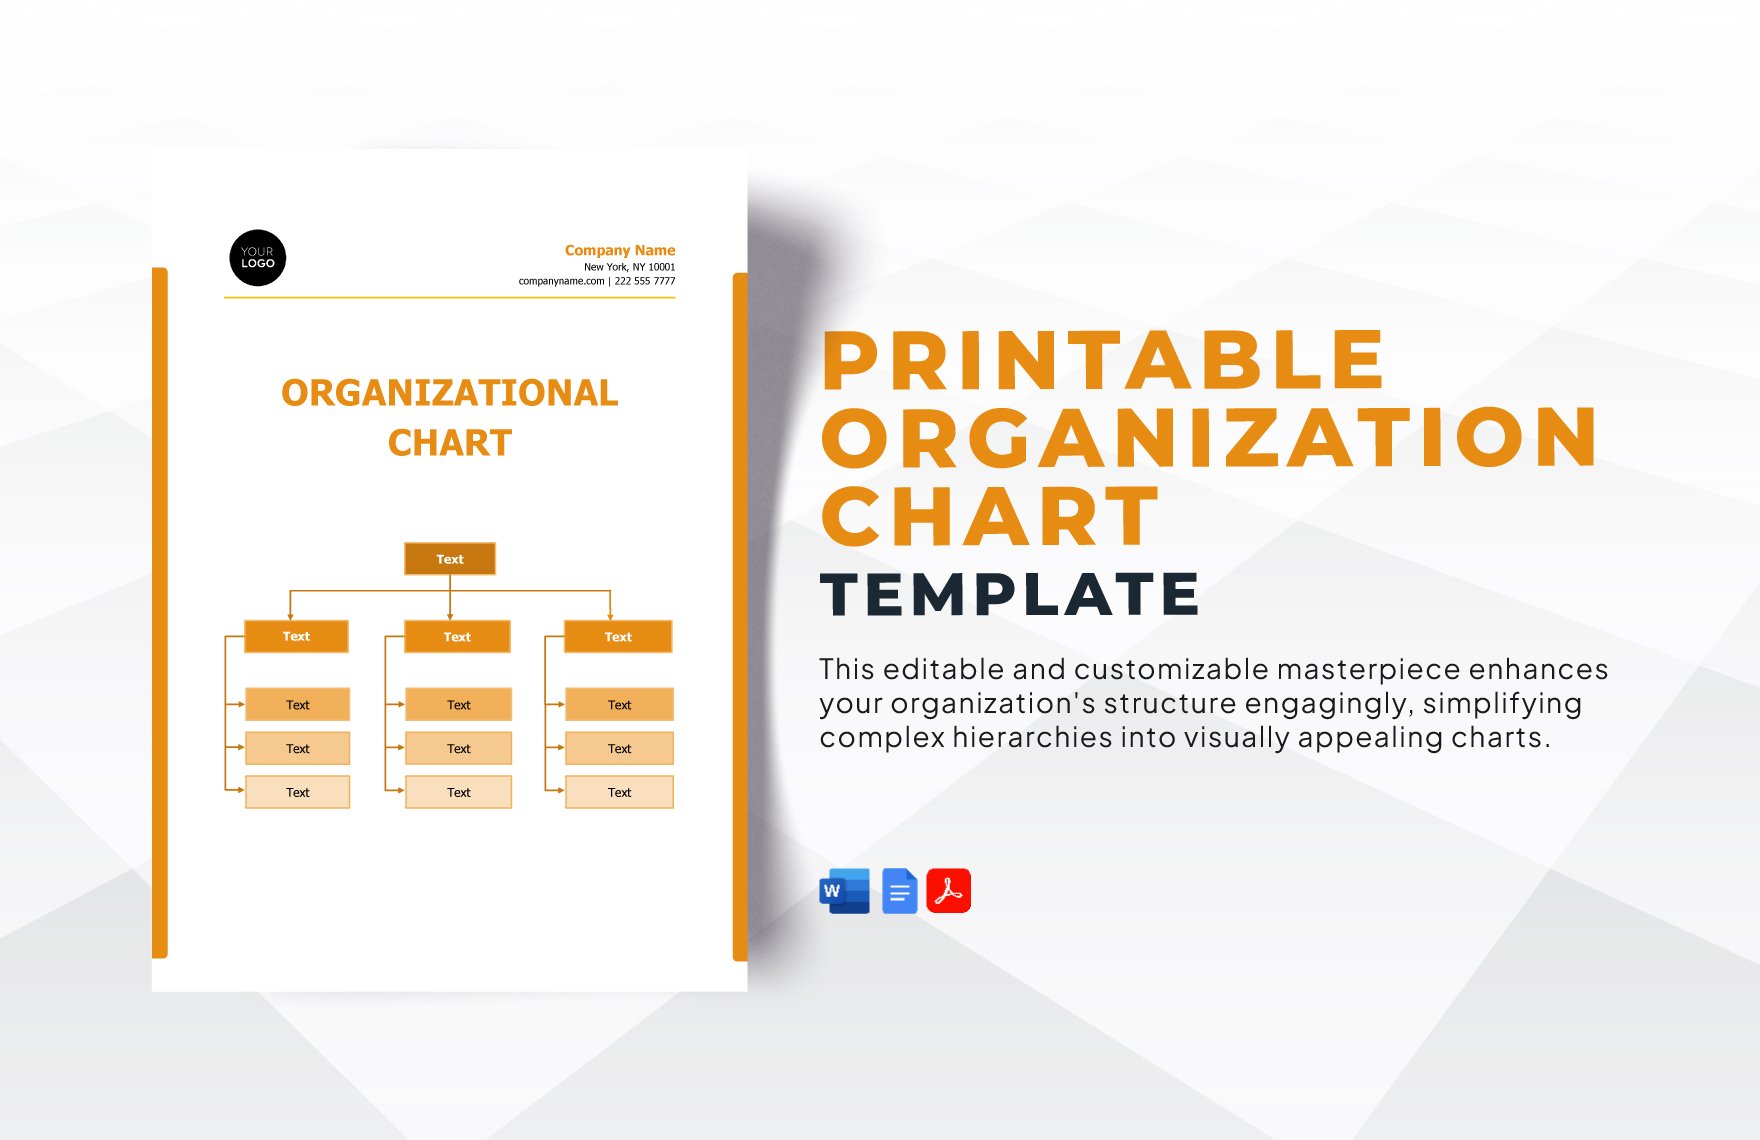 Printable Organization Chart Template in Word, PDF